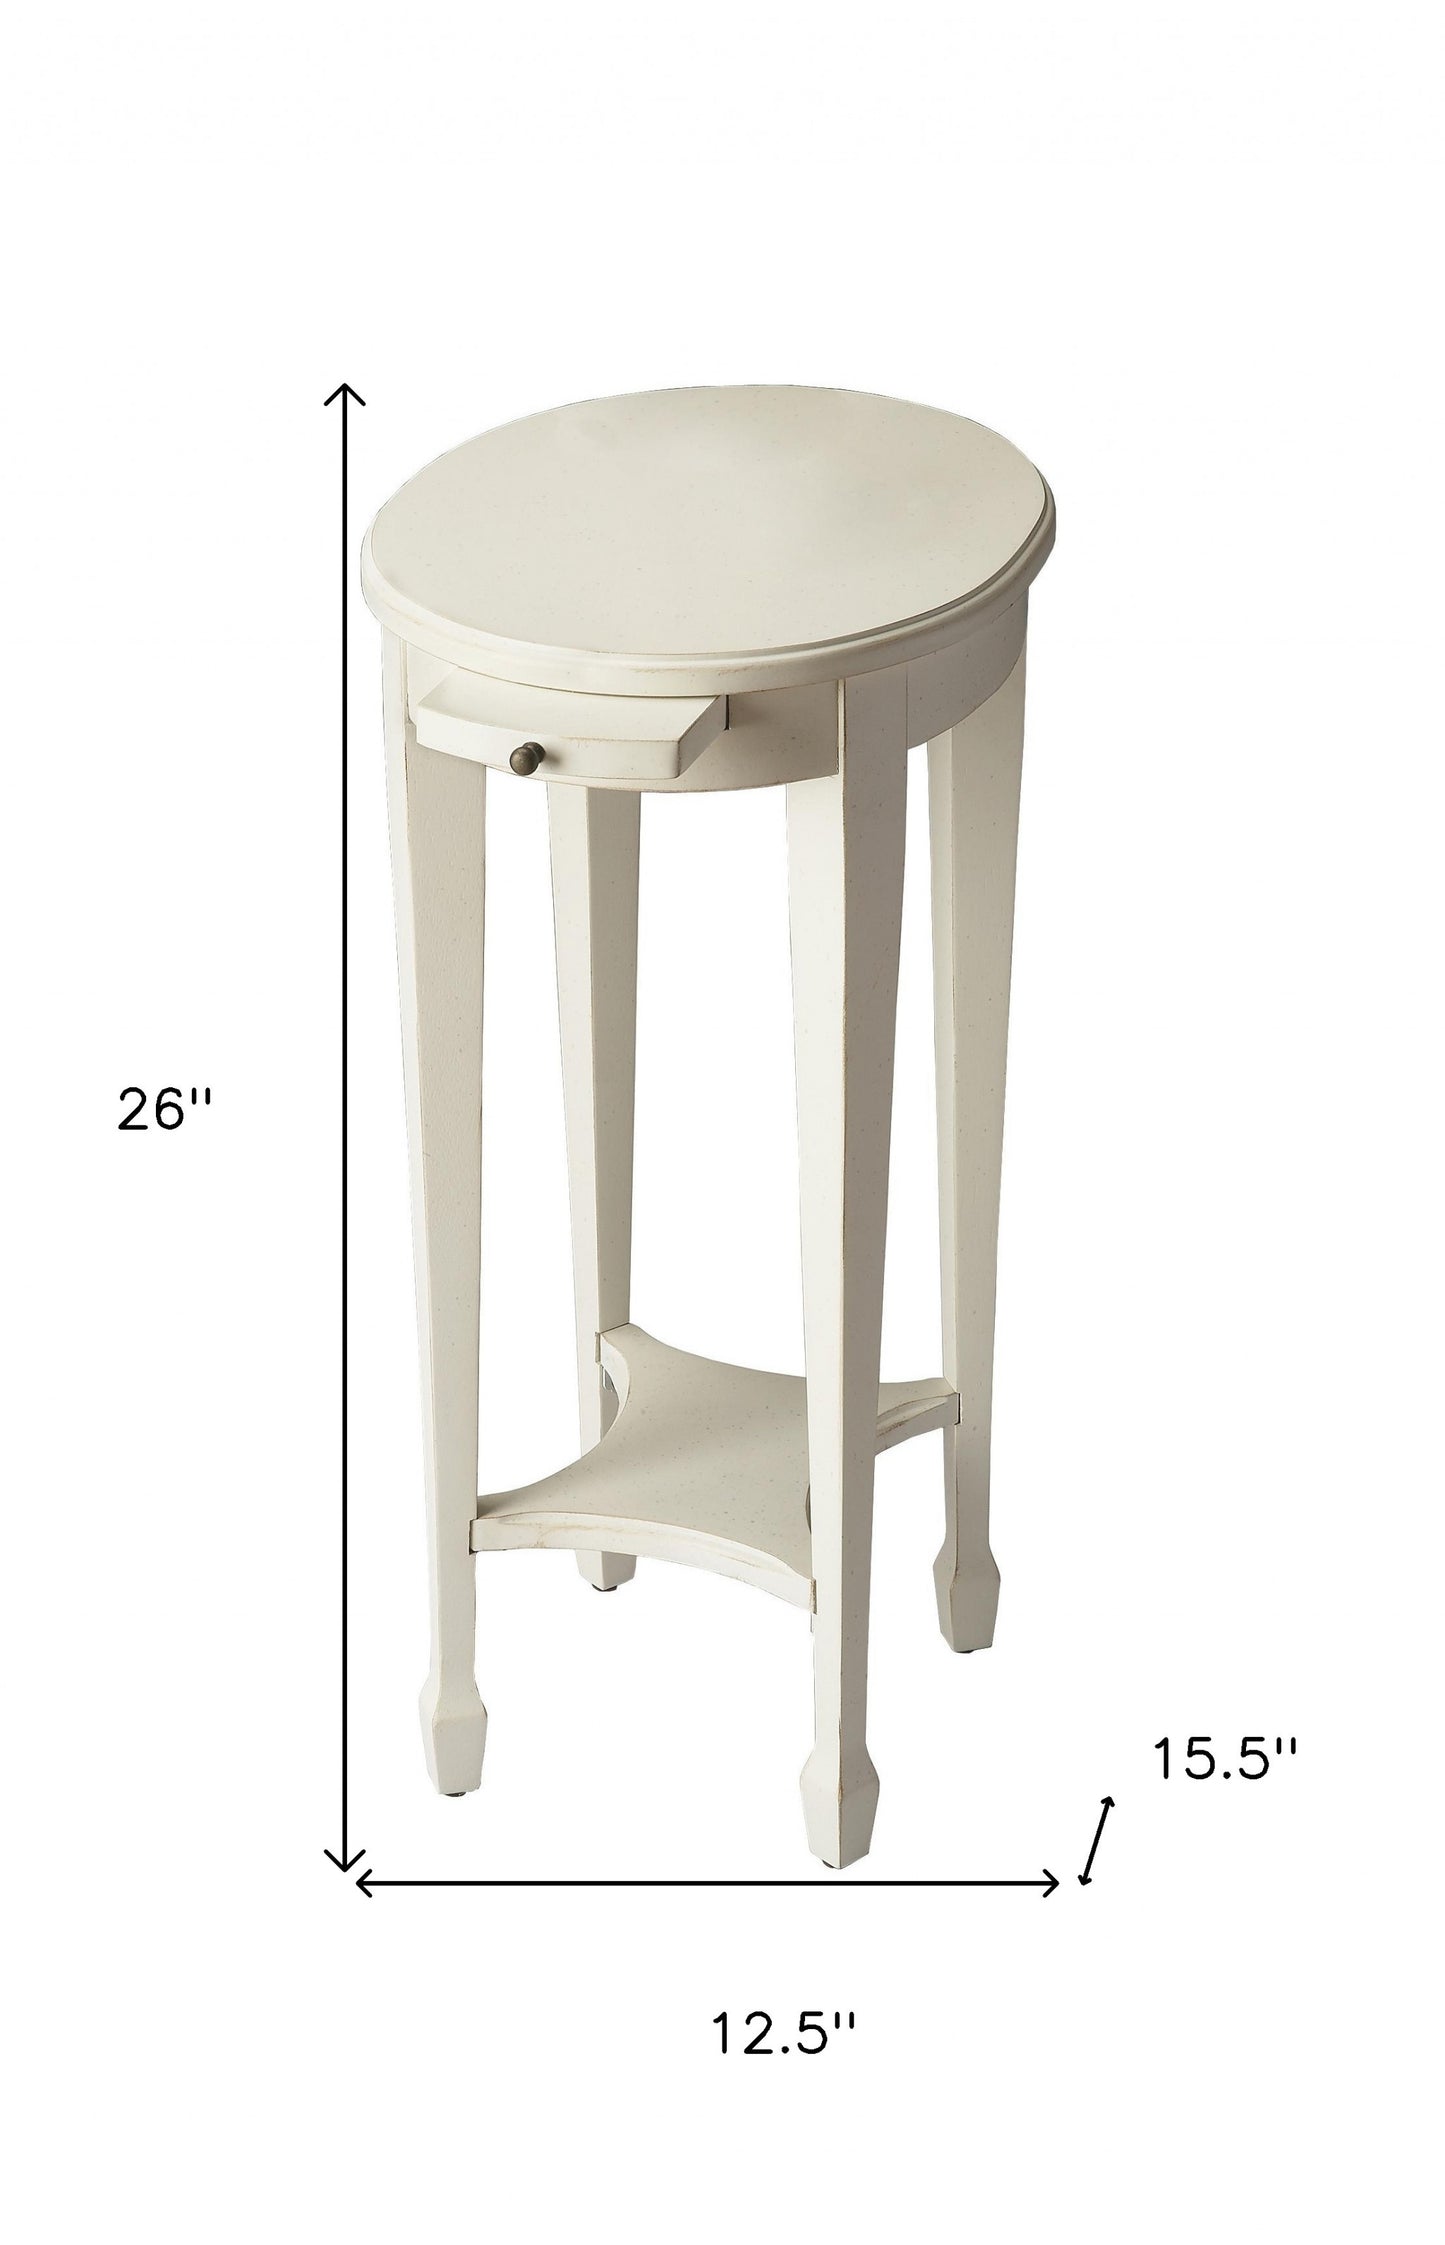 26" White And Cottage White Manufactured Wood Oval End Table With Shelf By Homeroots